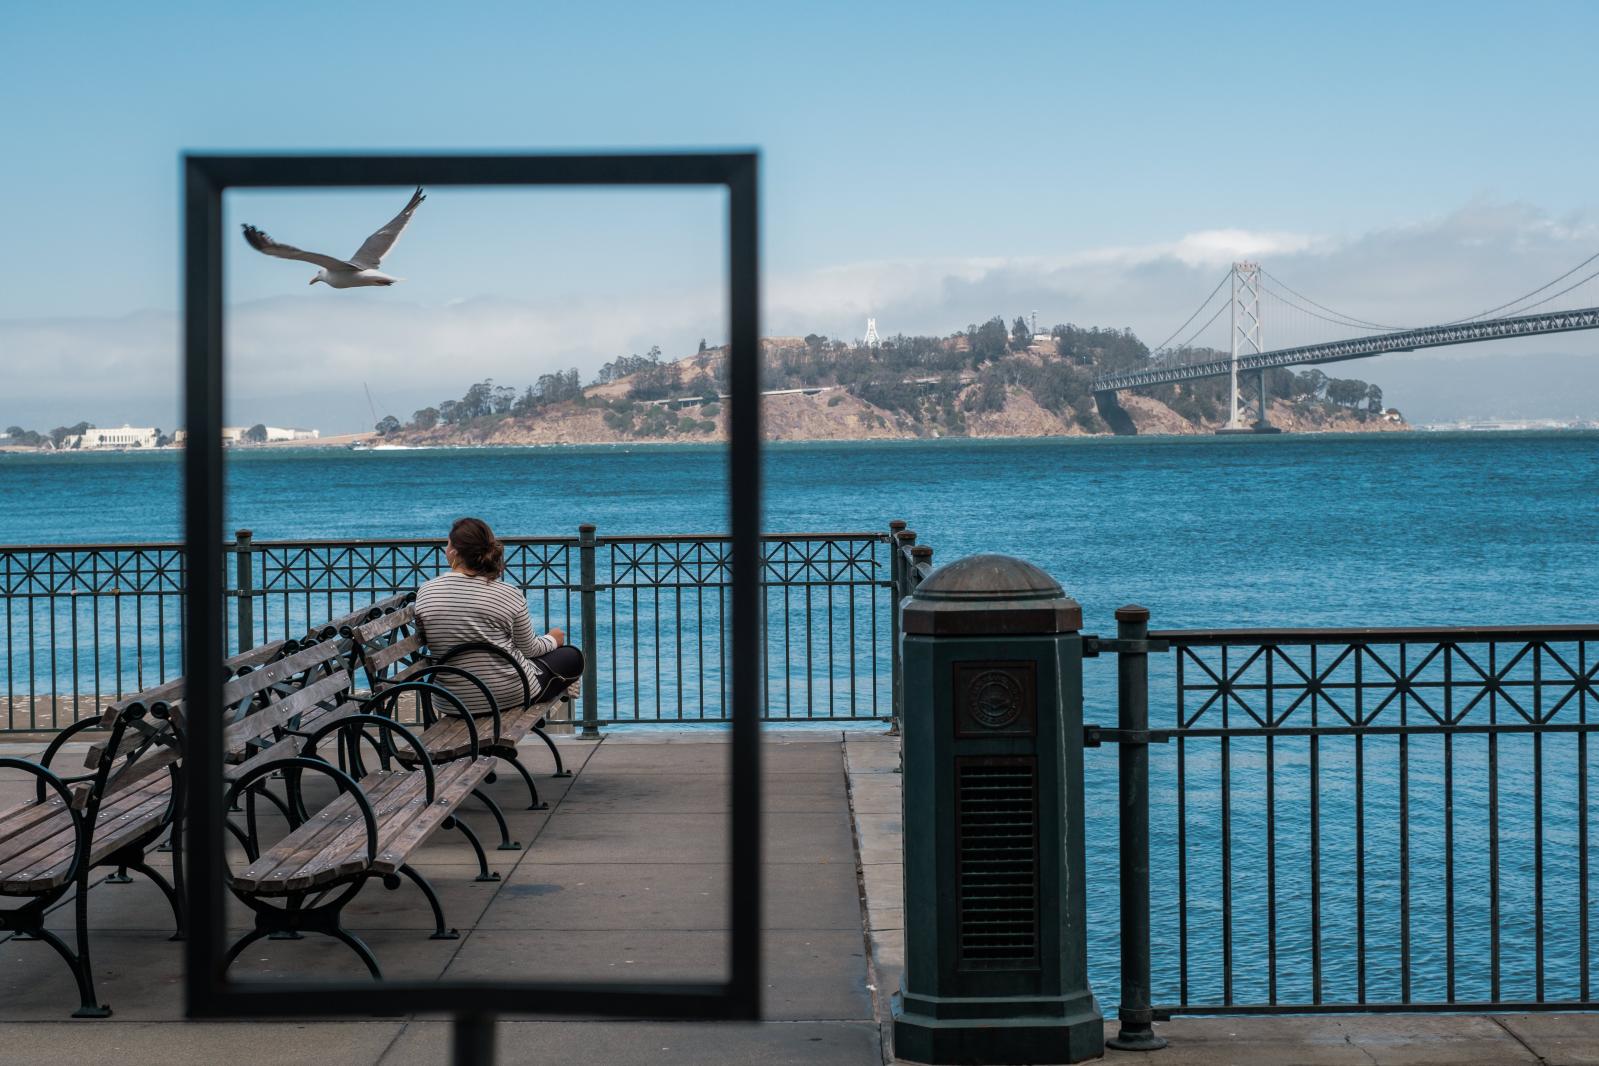 SAN FRANCISCO, CA - AUGUST 5: A woman looks out over the water as a Seagull flies over at the Ferry Building in San Francisco. (Photo by Nick Otto for the Washington Post)